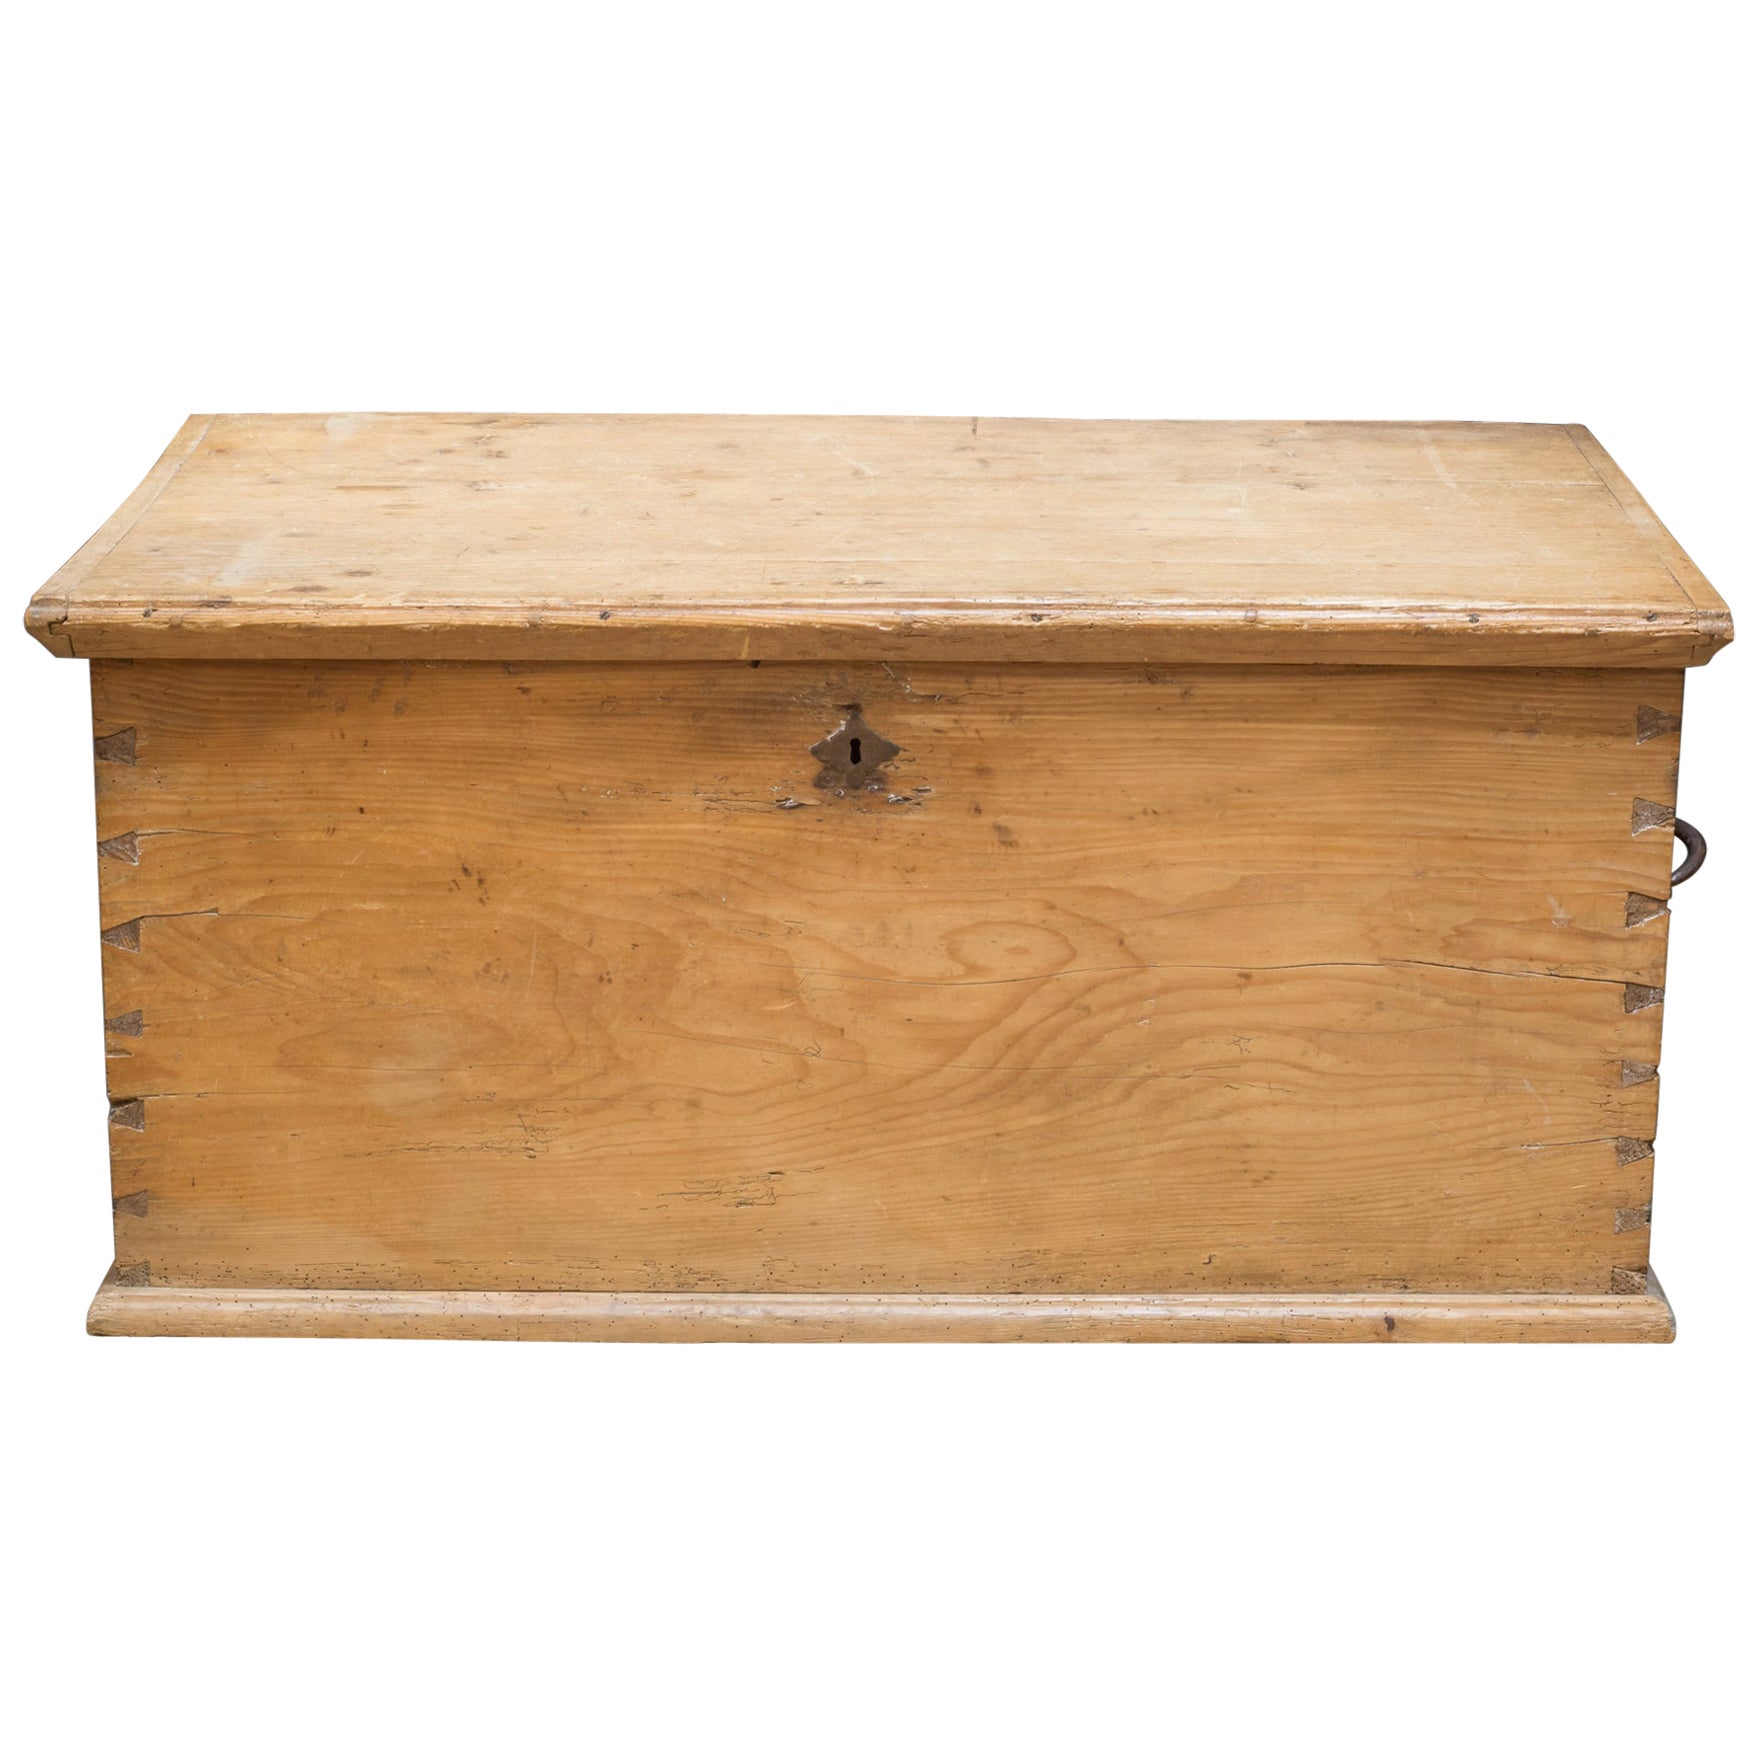 Late 19th/Early 20th C. Blanket Chest c.1880-1920